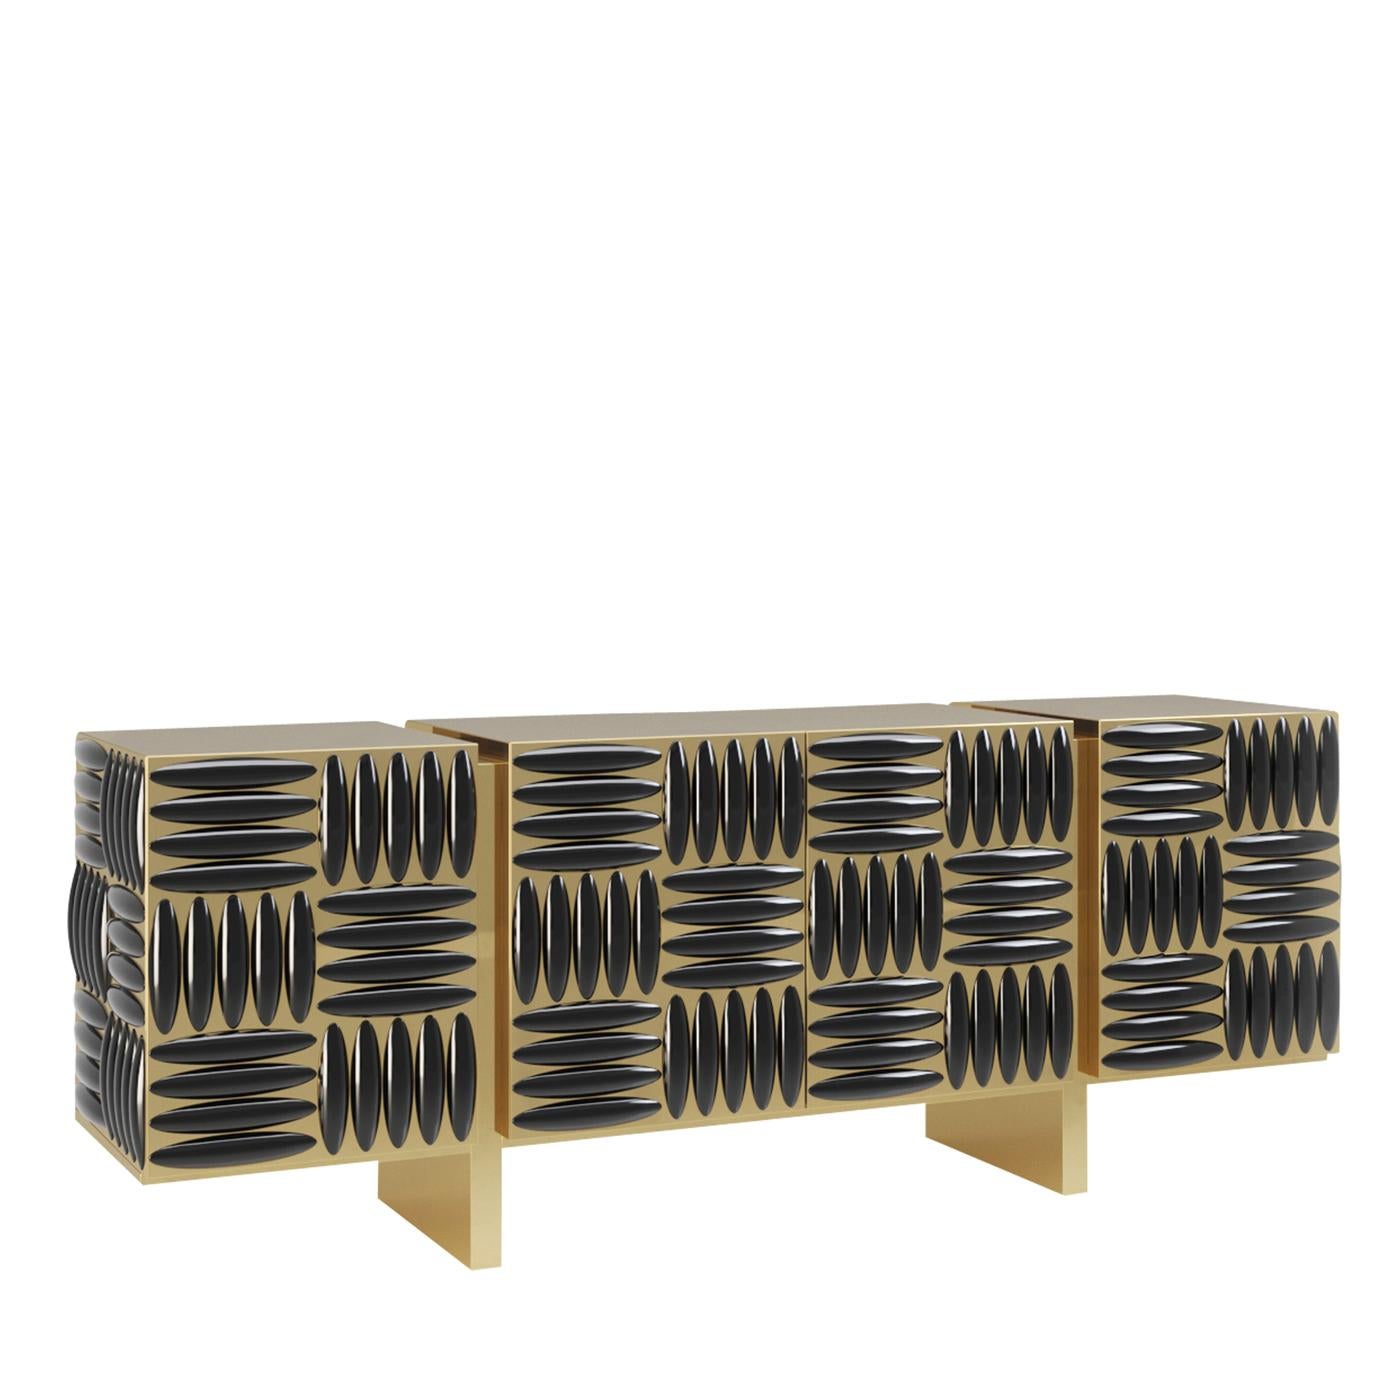 Marked by a resolutely contemporary flair, this sideboard stands out for the masterfully carried out carving process used to decorate its four front doors. The structure showcases a gold finish with a recurring pattern of perpendicularly oriented